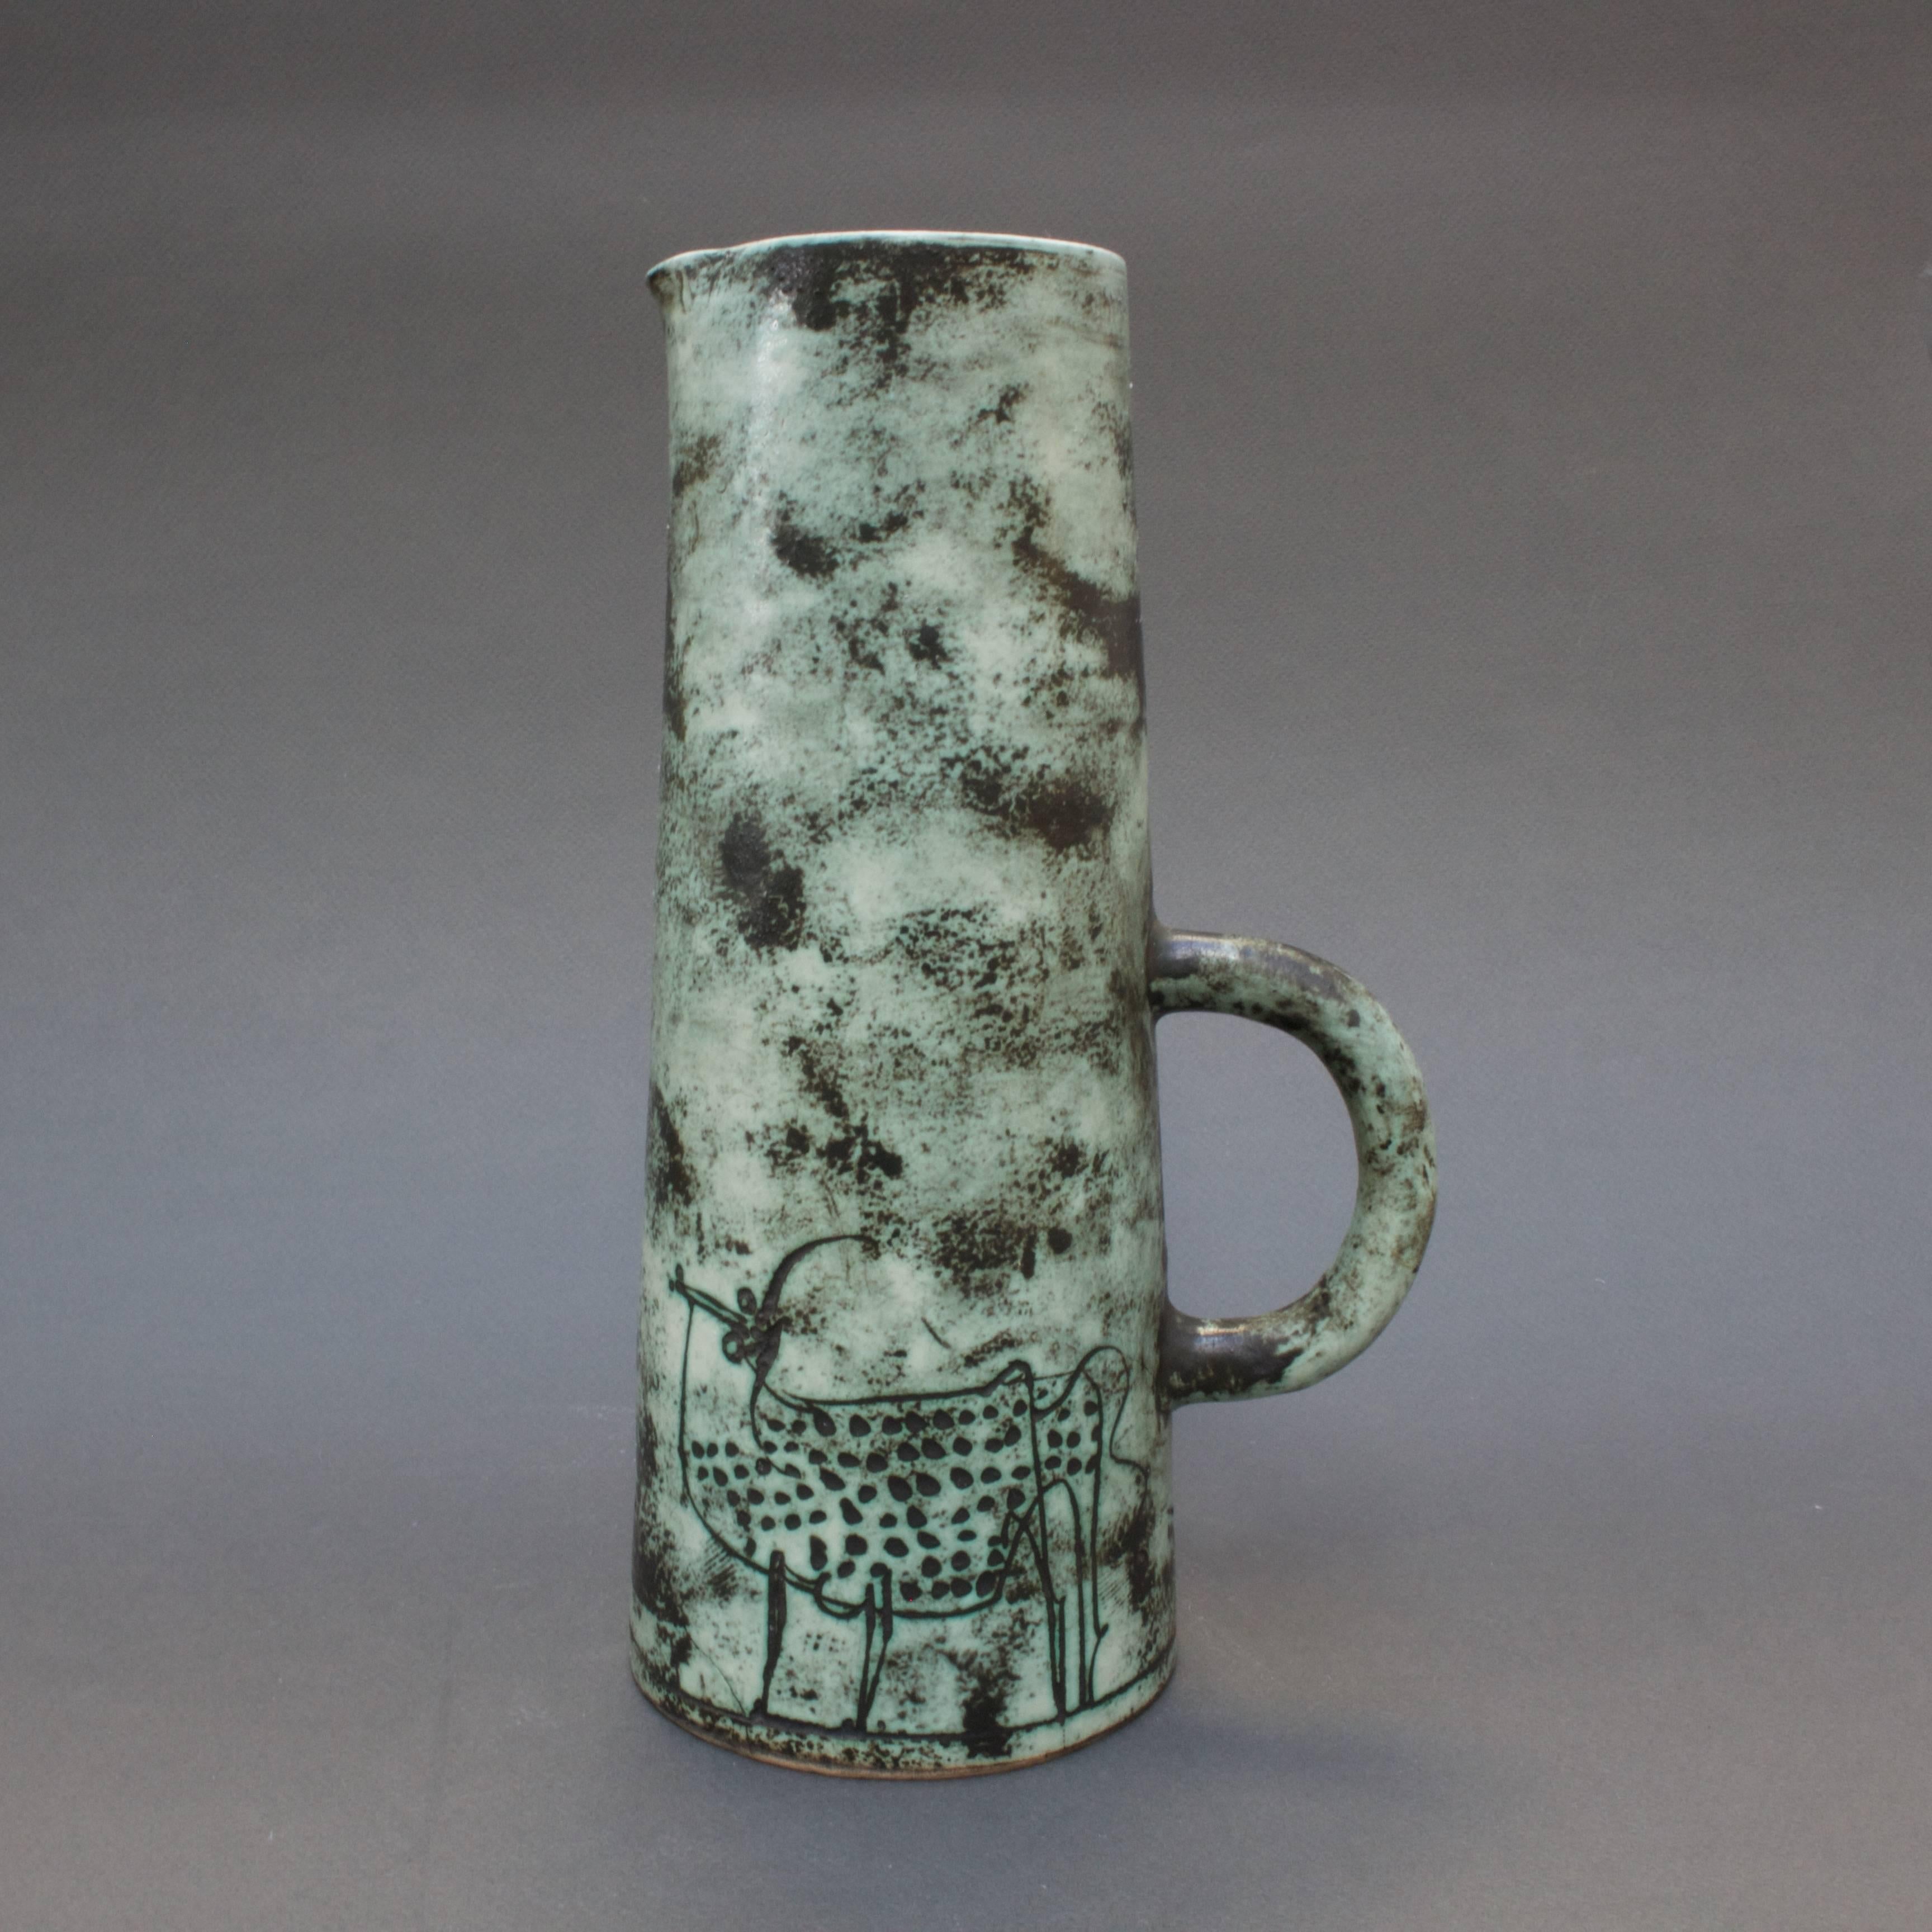 Ceramic pitcher (1950s - 1960s) by Jacques Blin (1920 - 1995), an engineer by trade but with a love for the visual arts and an immediately recognisable style. A way of working characterised by a more or less misty appearance of the glaze and by